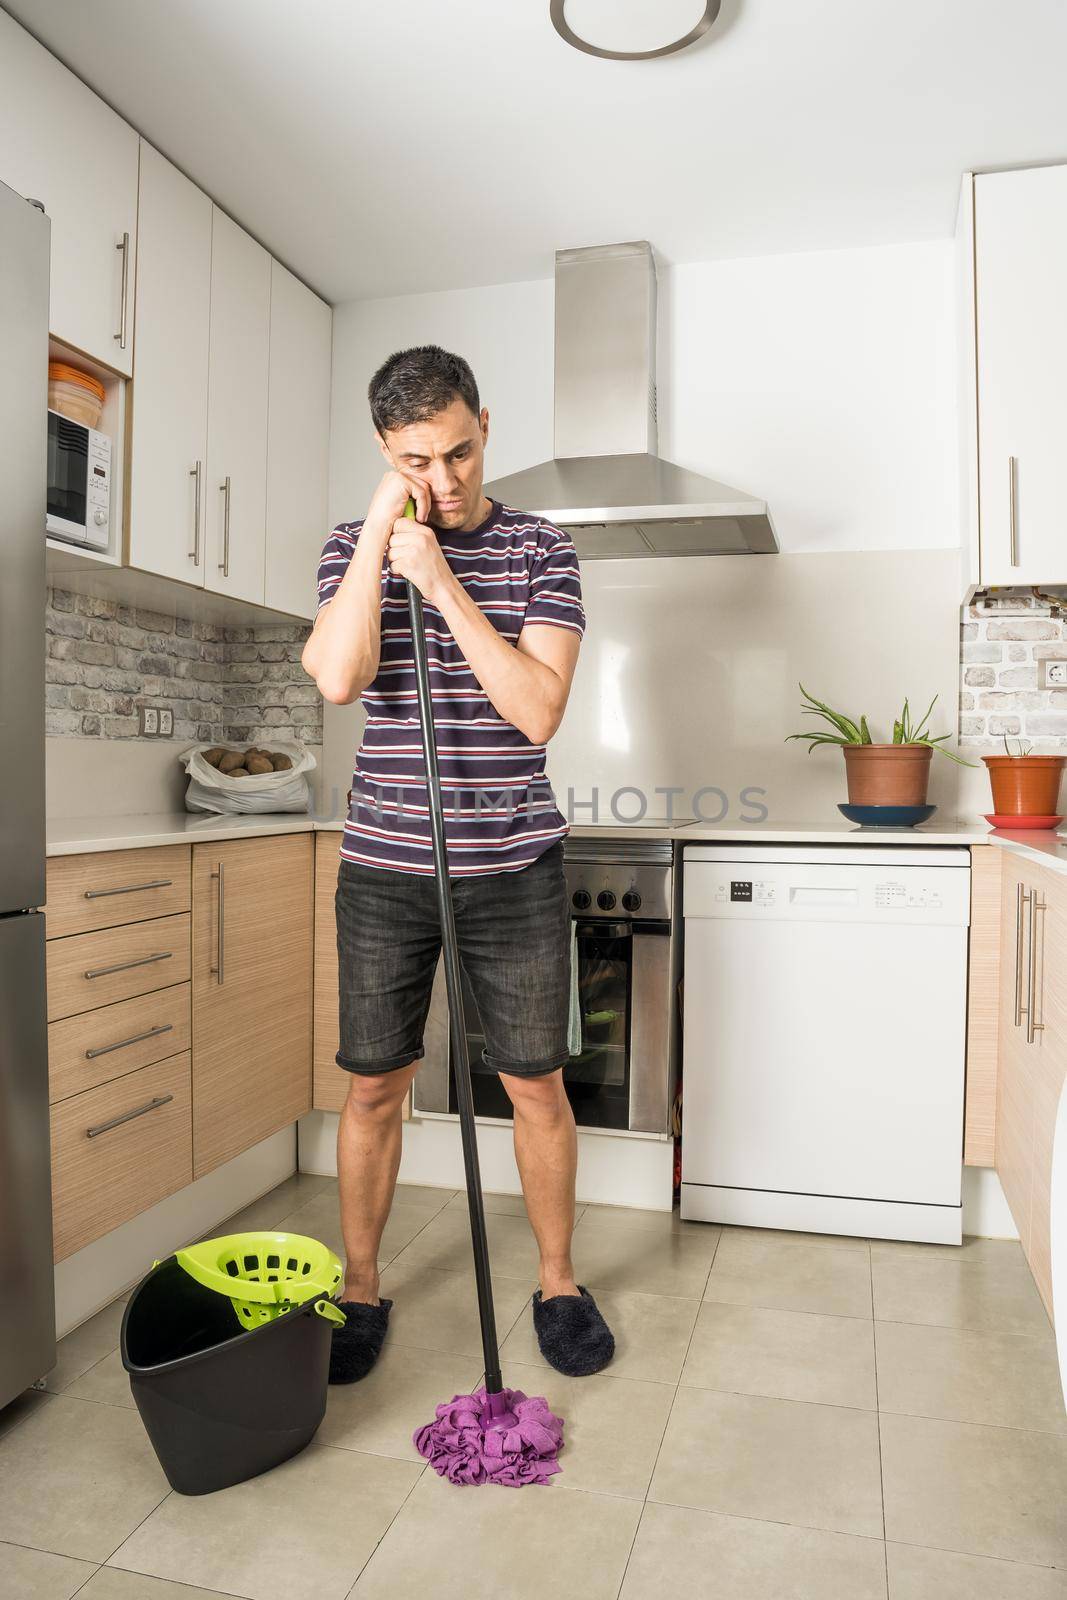 Sad and pensive man wearing casual clothes and slippers mopping the kitchen floor. Full body.